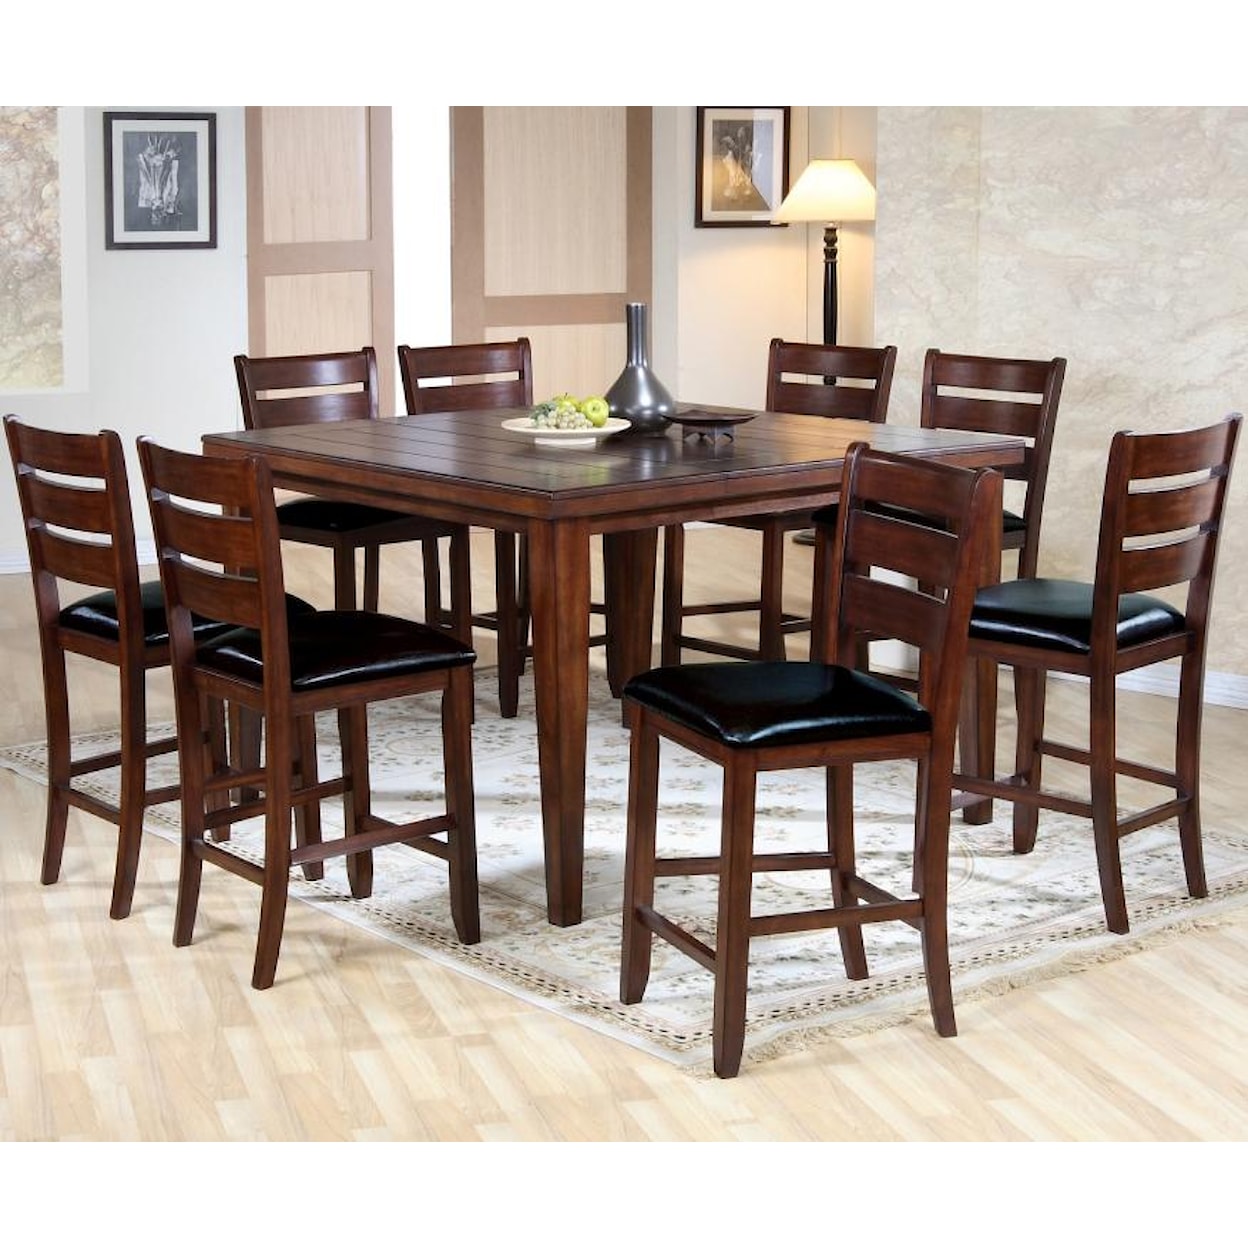 Primo International 4545 Dining Table and Chairs